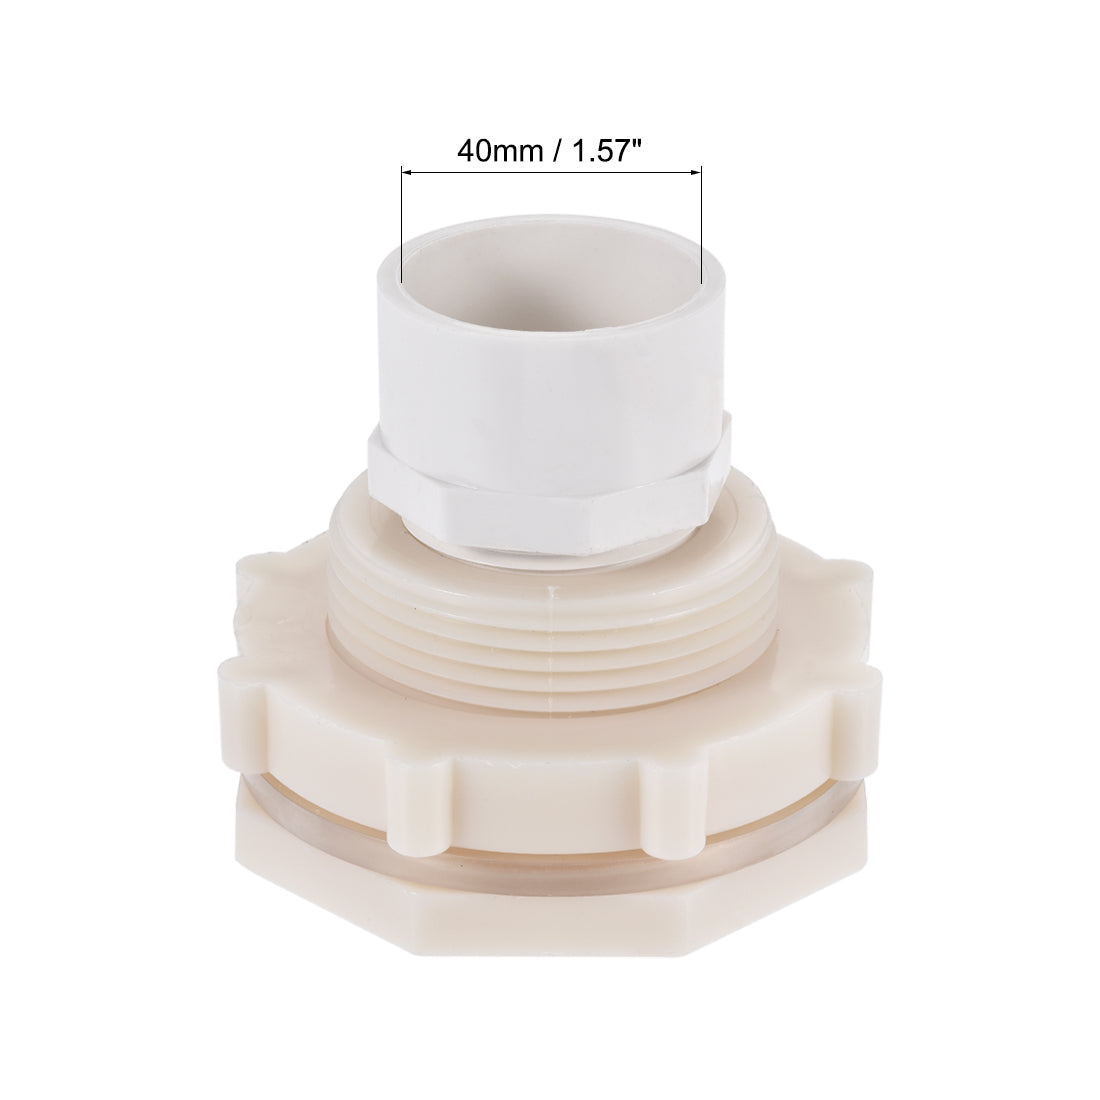 Uxcell Uxcell Bulkhead Fitting, G1-1/2 Female 2.44" Male, Tube Adaptor Fitting, with Silicone Gasket and Pipe Connector, for Water Tanks, PVC, White